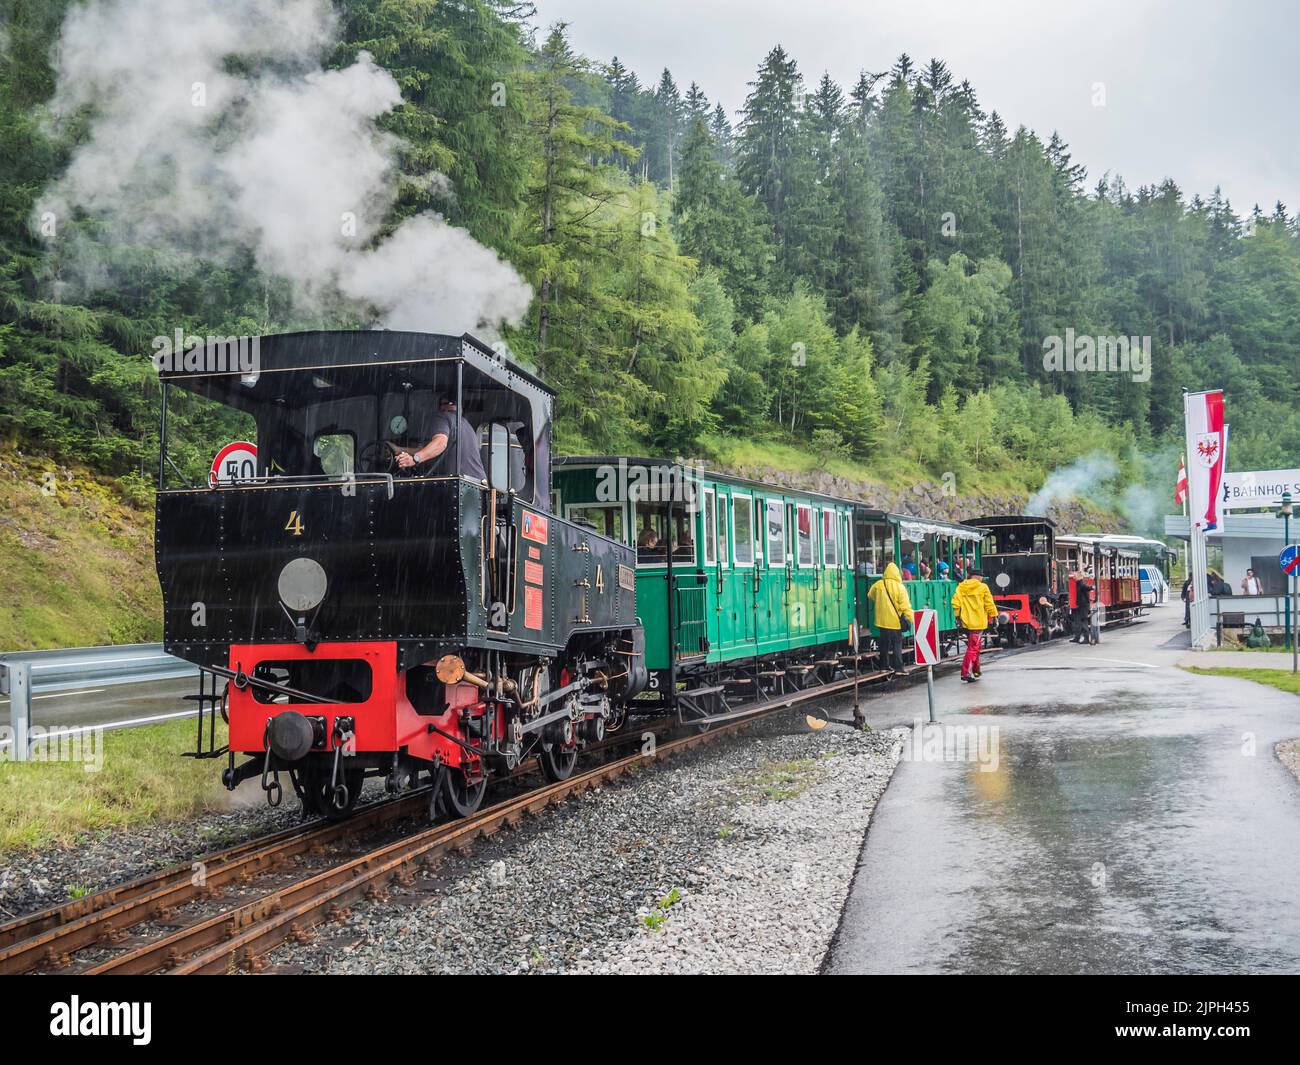 This is the famous cog railway steam train with its vintage carriages tourist attraction that operates from Jenbach to the scenic lake Achensee Stock Photo